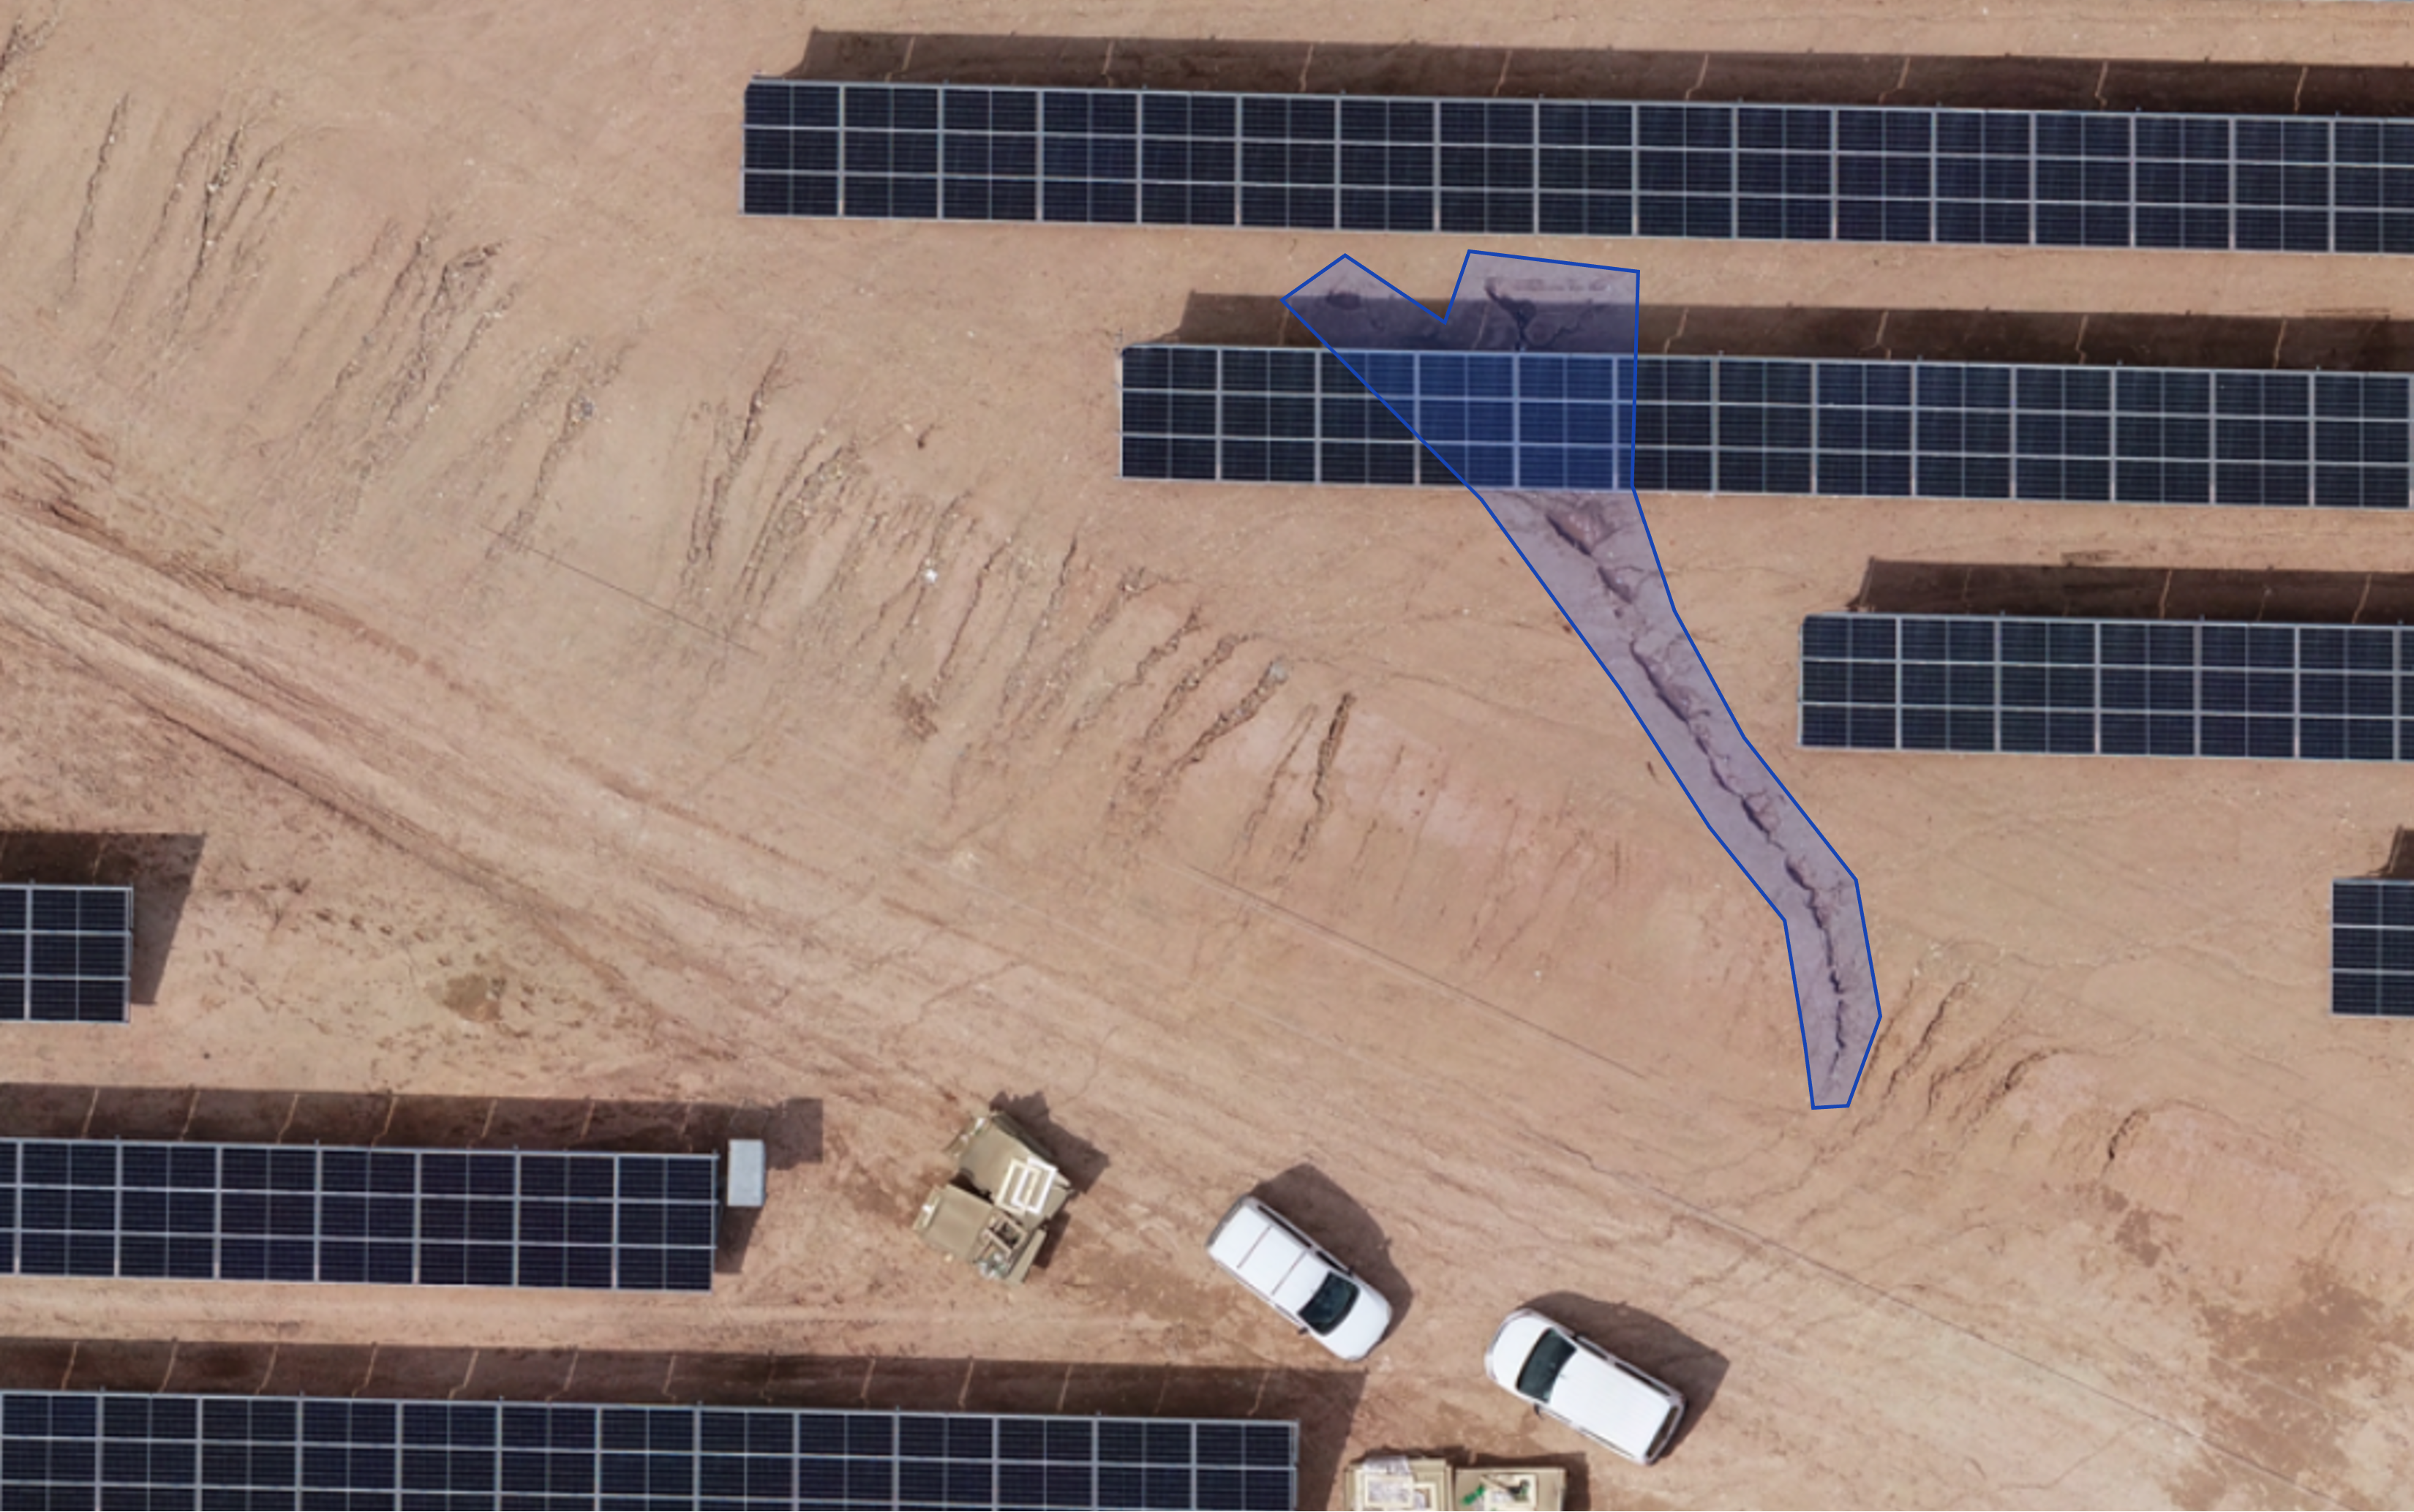 a large crack appeared which can result in soil slipping away - success story: How Alinea Solar’s customer saved 15.000€ by digitalizing their project